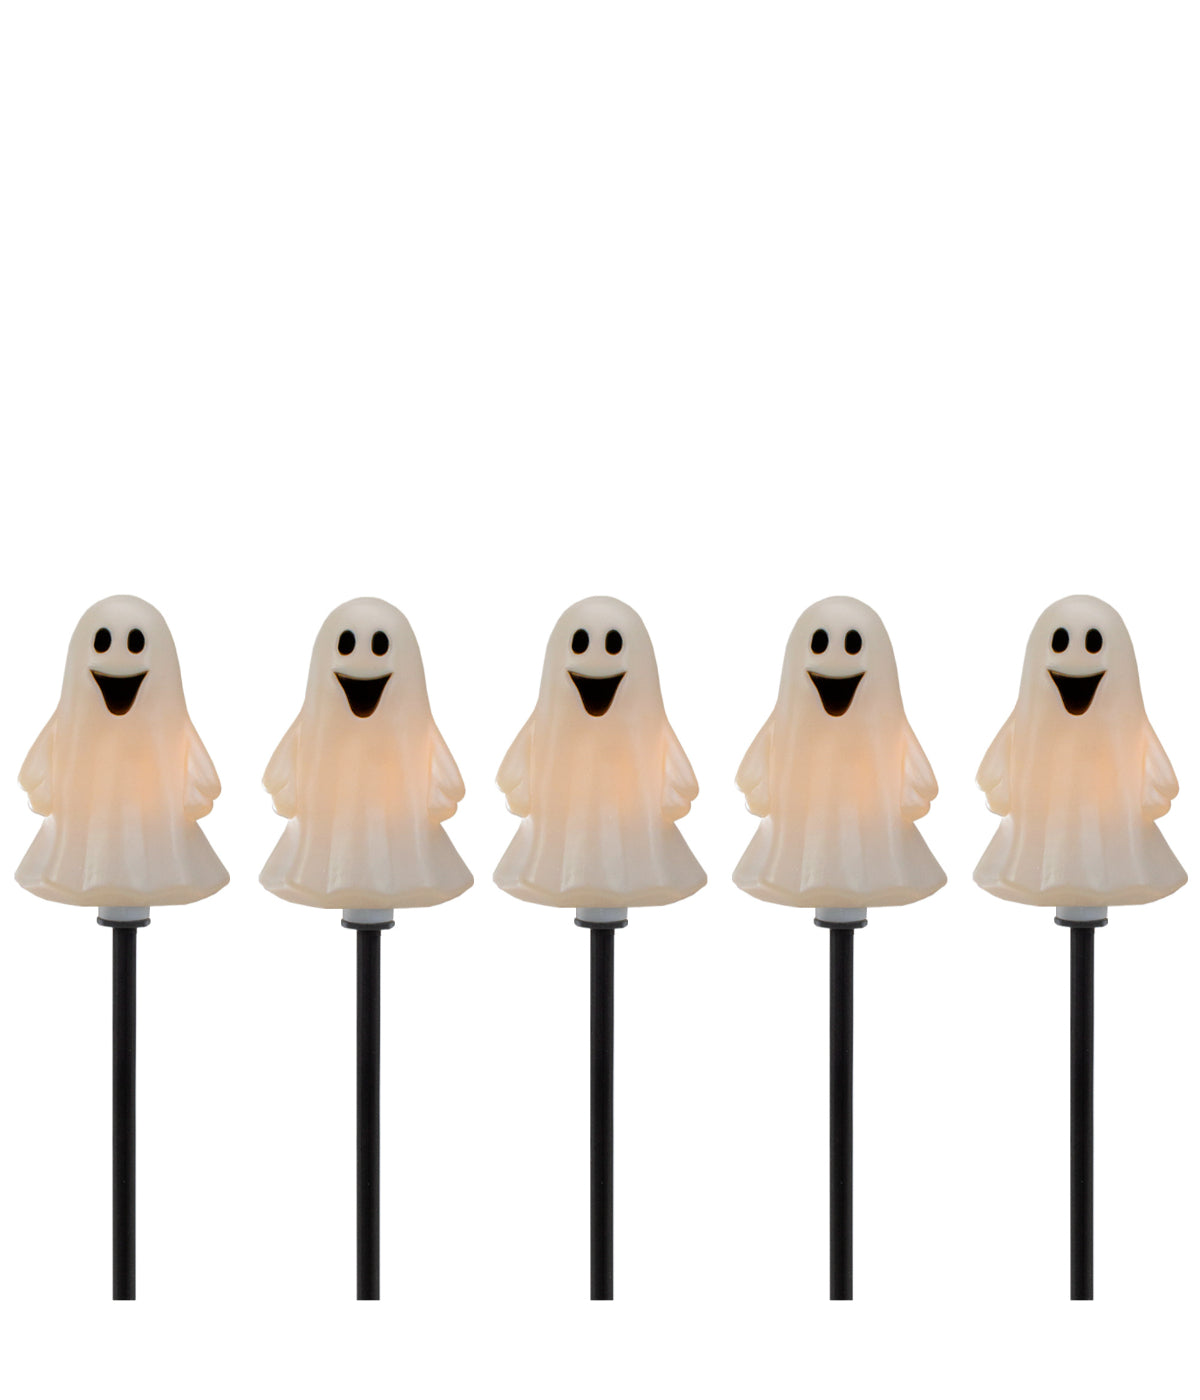 Ghost Shaped Halloween Pathway Markers Set of 5